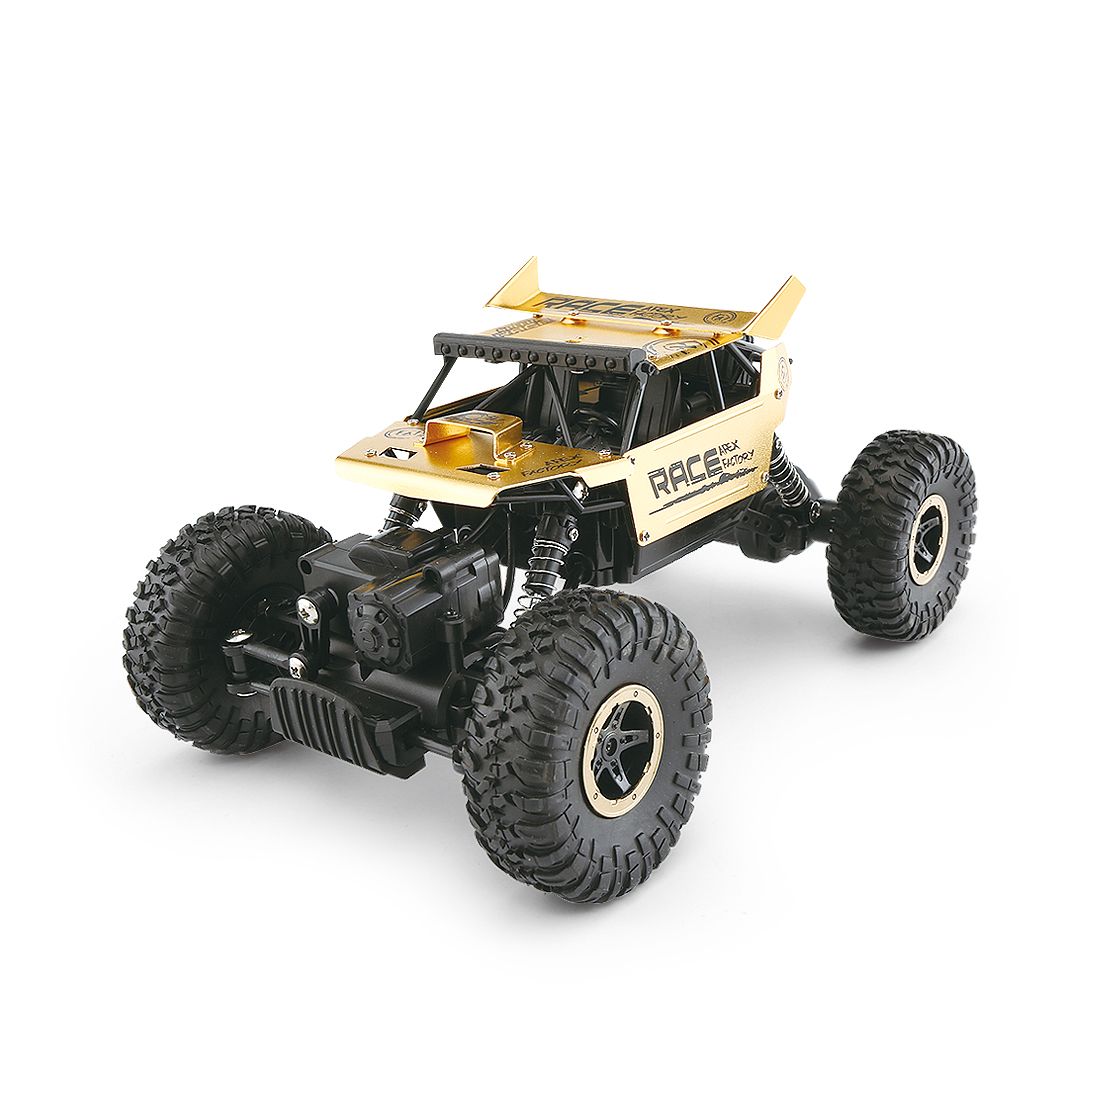 Singda 2.4Ghz 1:18 4WD Rock Crawler with alloy tail SD699-108L